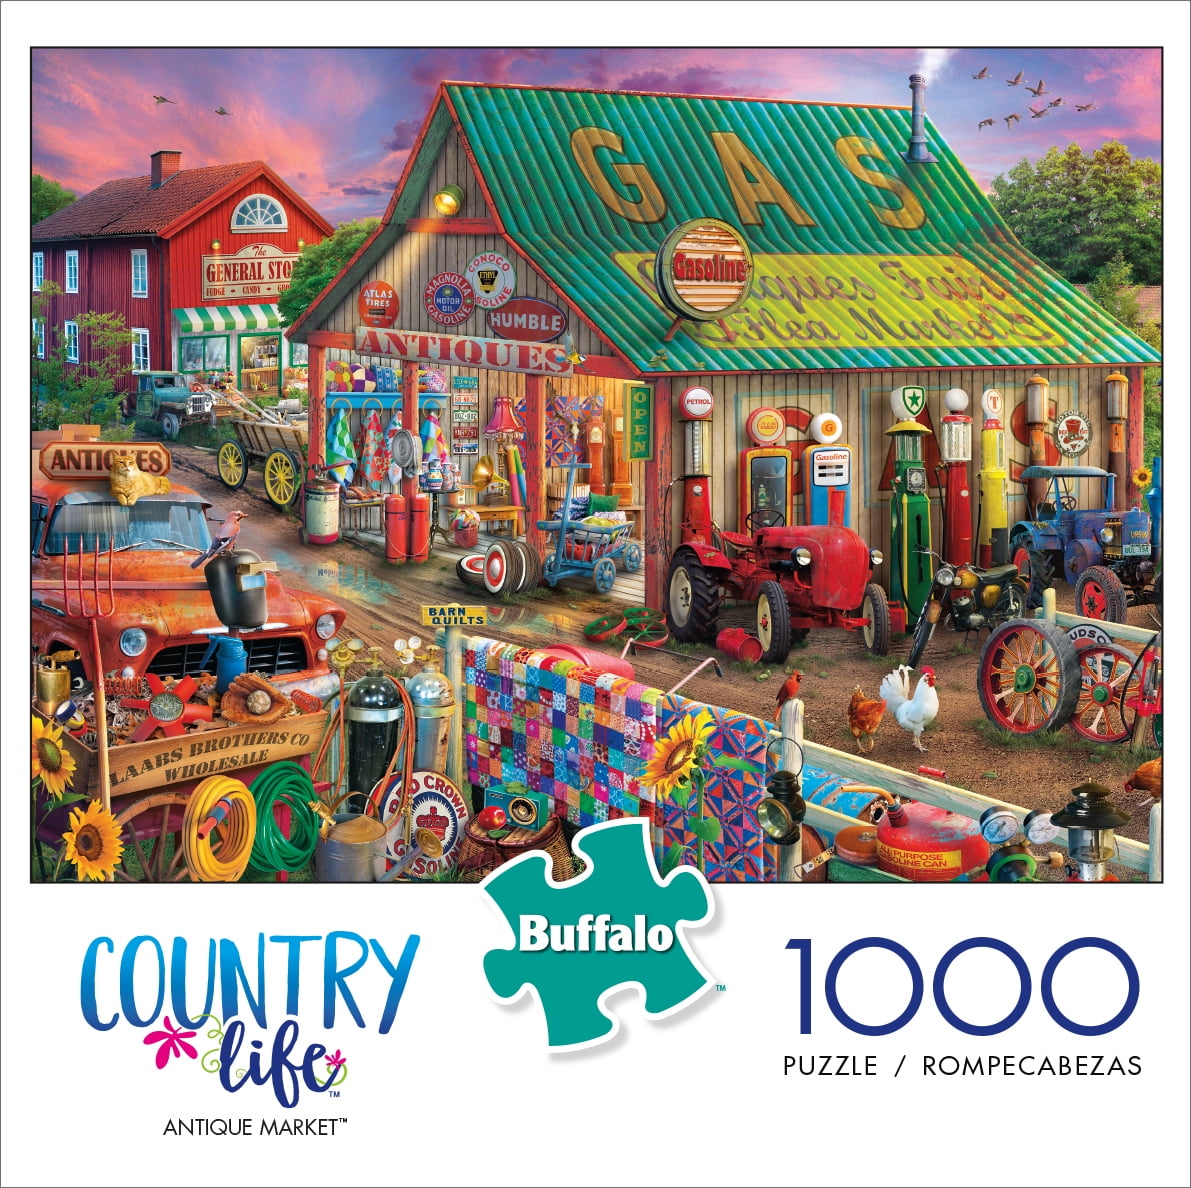 1000 Piece Jigsaw Puzzle Buffalo Country Life 26 in x 19 in. COUNTRY STORE 